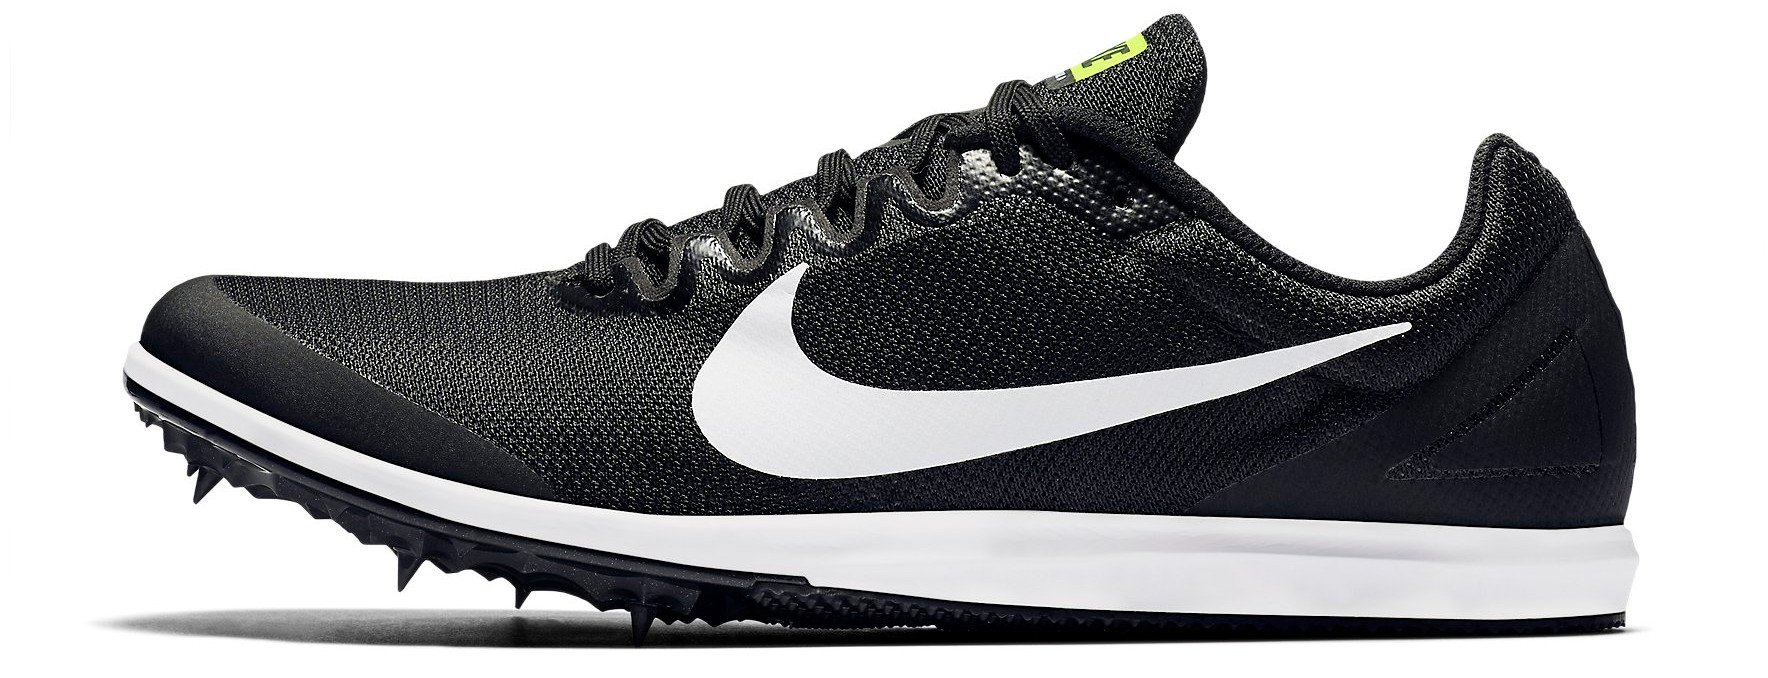 Unisex tretry Nike Zoom Rival D 10